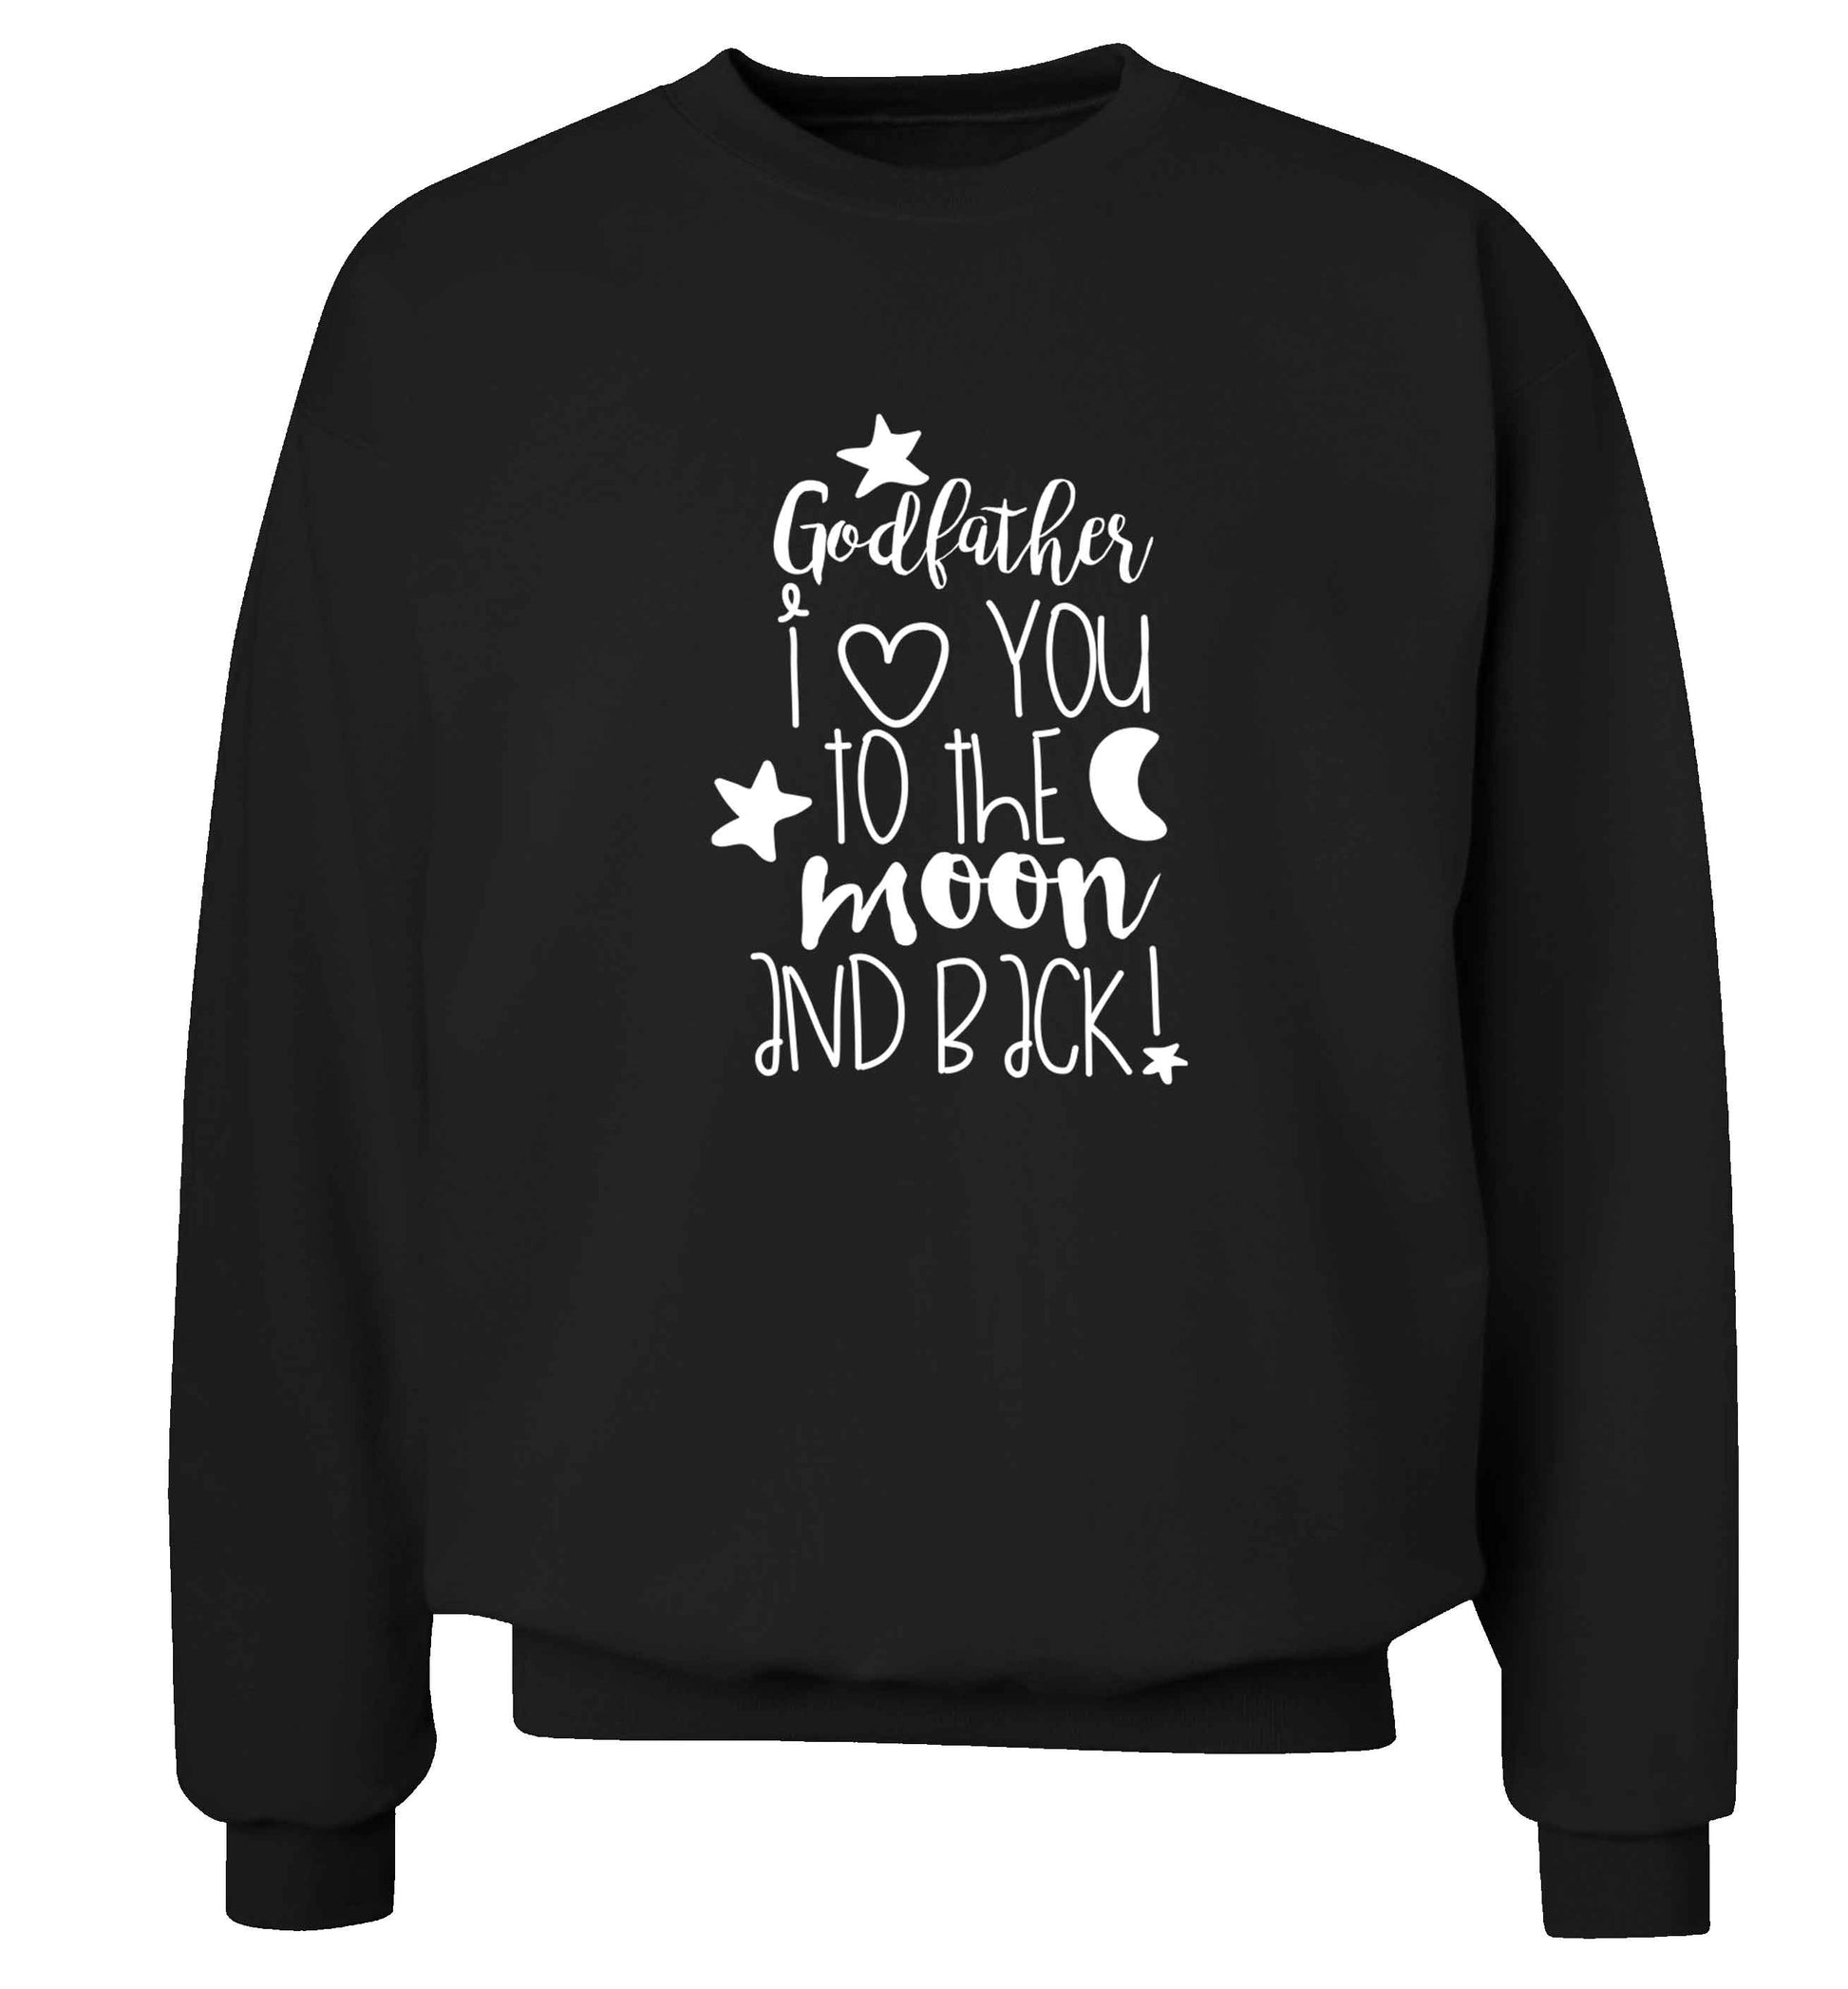 Godfather I love you to the moon and back adult's unisex black sweater 2XL